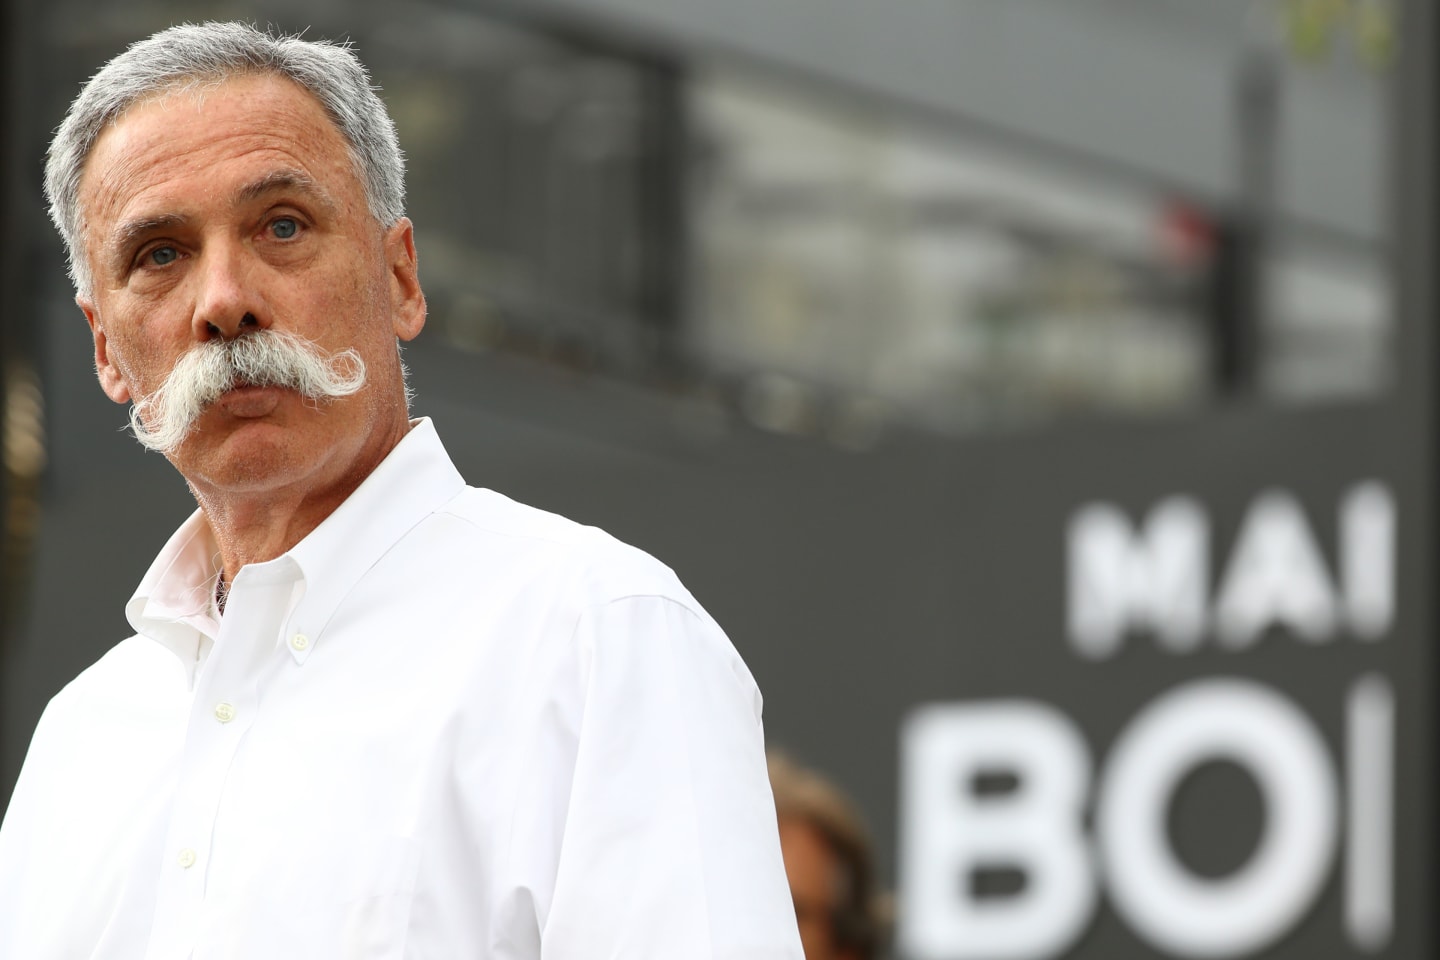 MELBOURNE, AUSTRALIA - MARCH 13: Chase Carey, CEO and Executive Chairman of the Formula One Group,